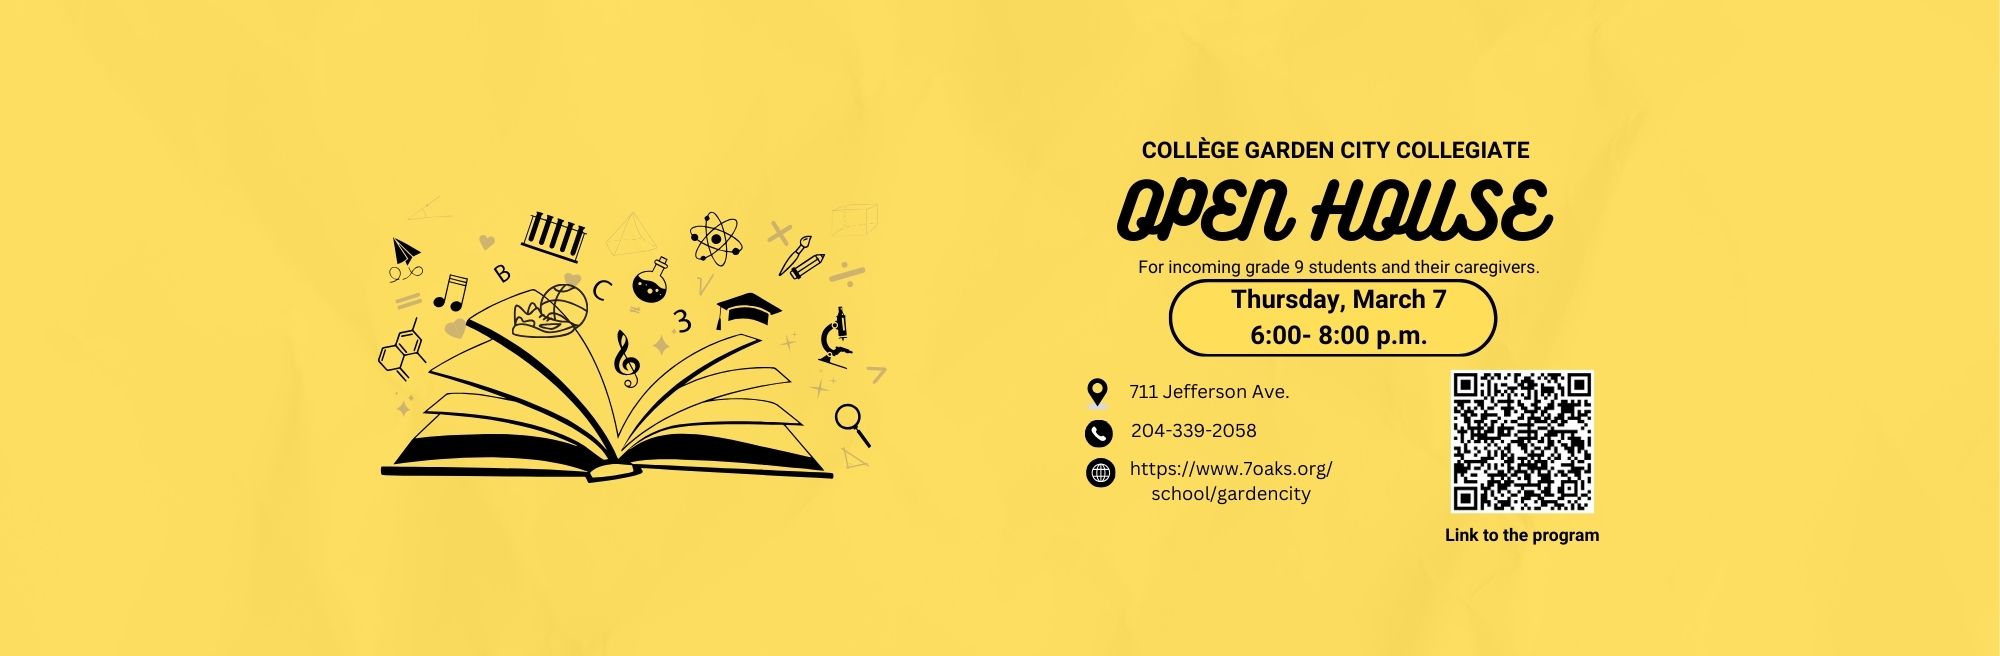 Collège Garden City Collegiate’s OPEN HOUSE (Please click here for more information)